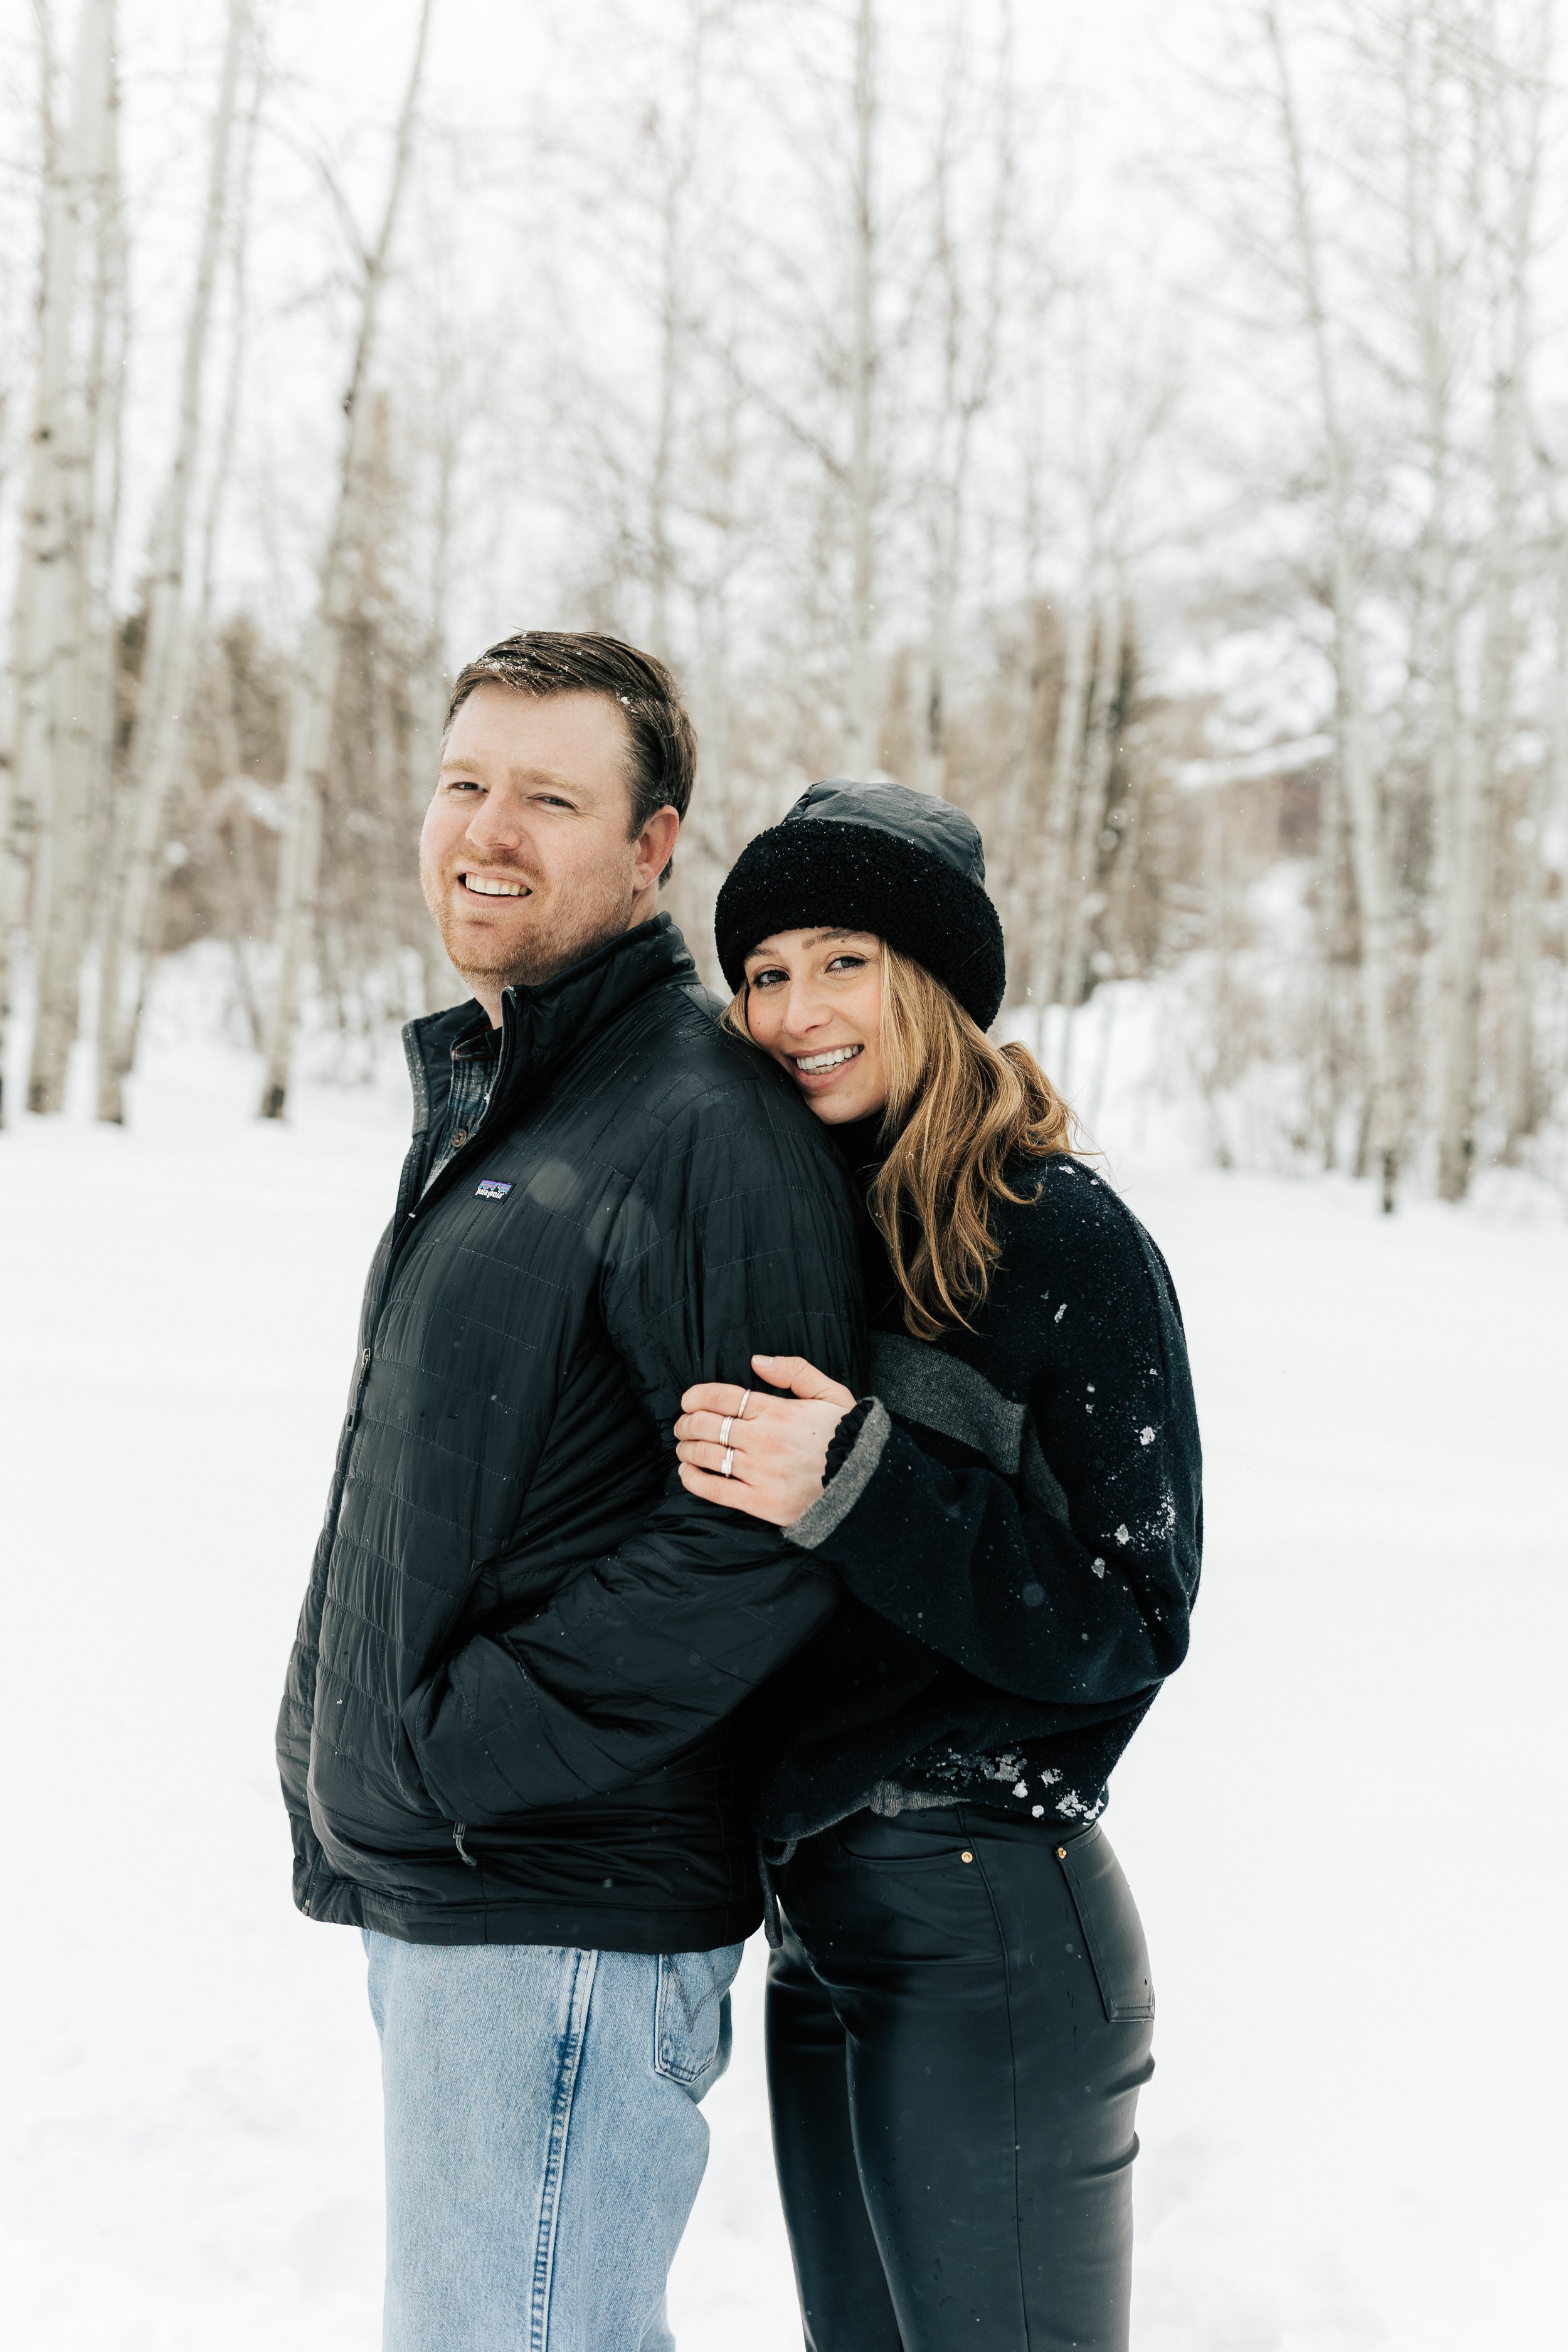  Newly engaged couple. Winter engagement session in Park City, Utah. Boyfriend surprises girlfriend with wedding proposal during a snowy photoshoot. Man proposes to girlfriend. #parkcity #engagements #engagementsessionn #proposal 